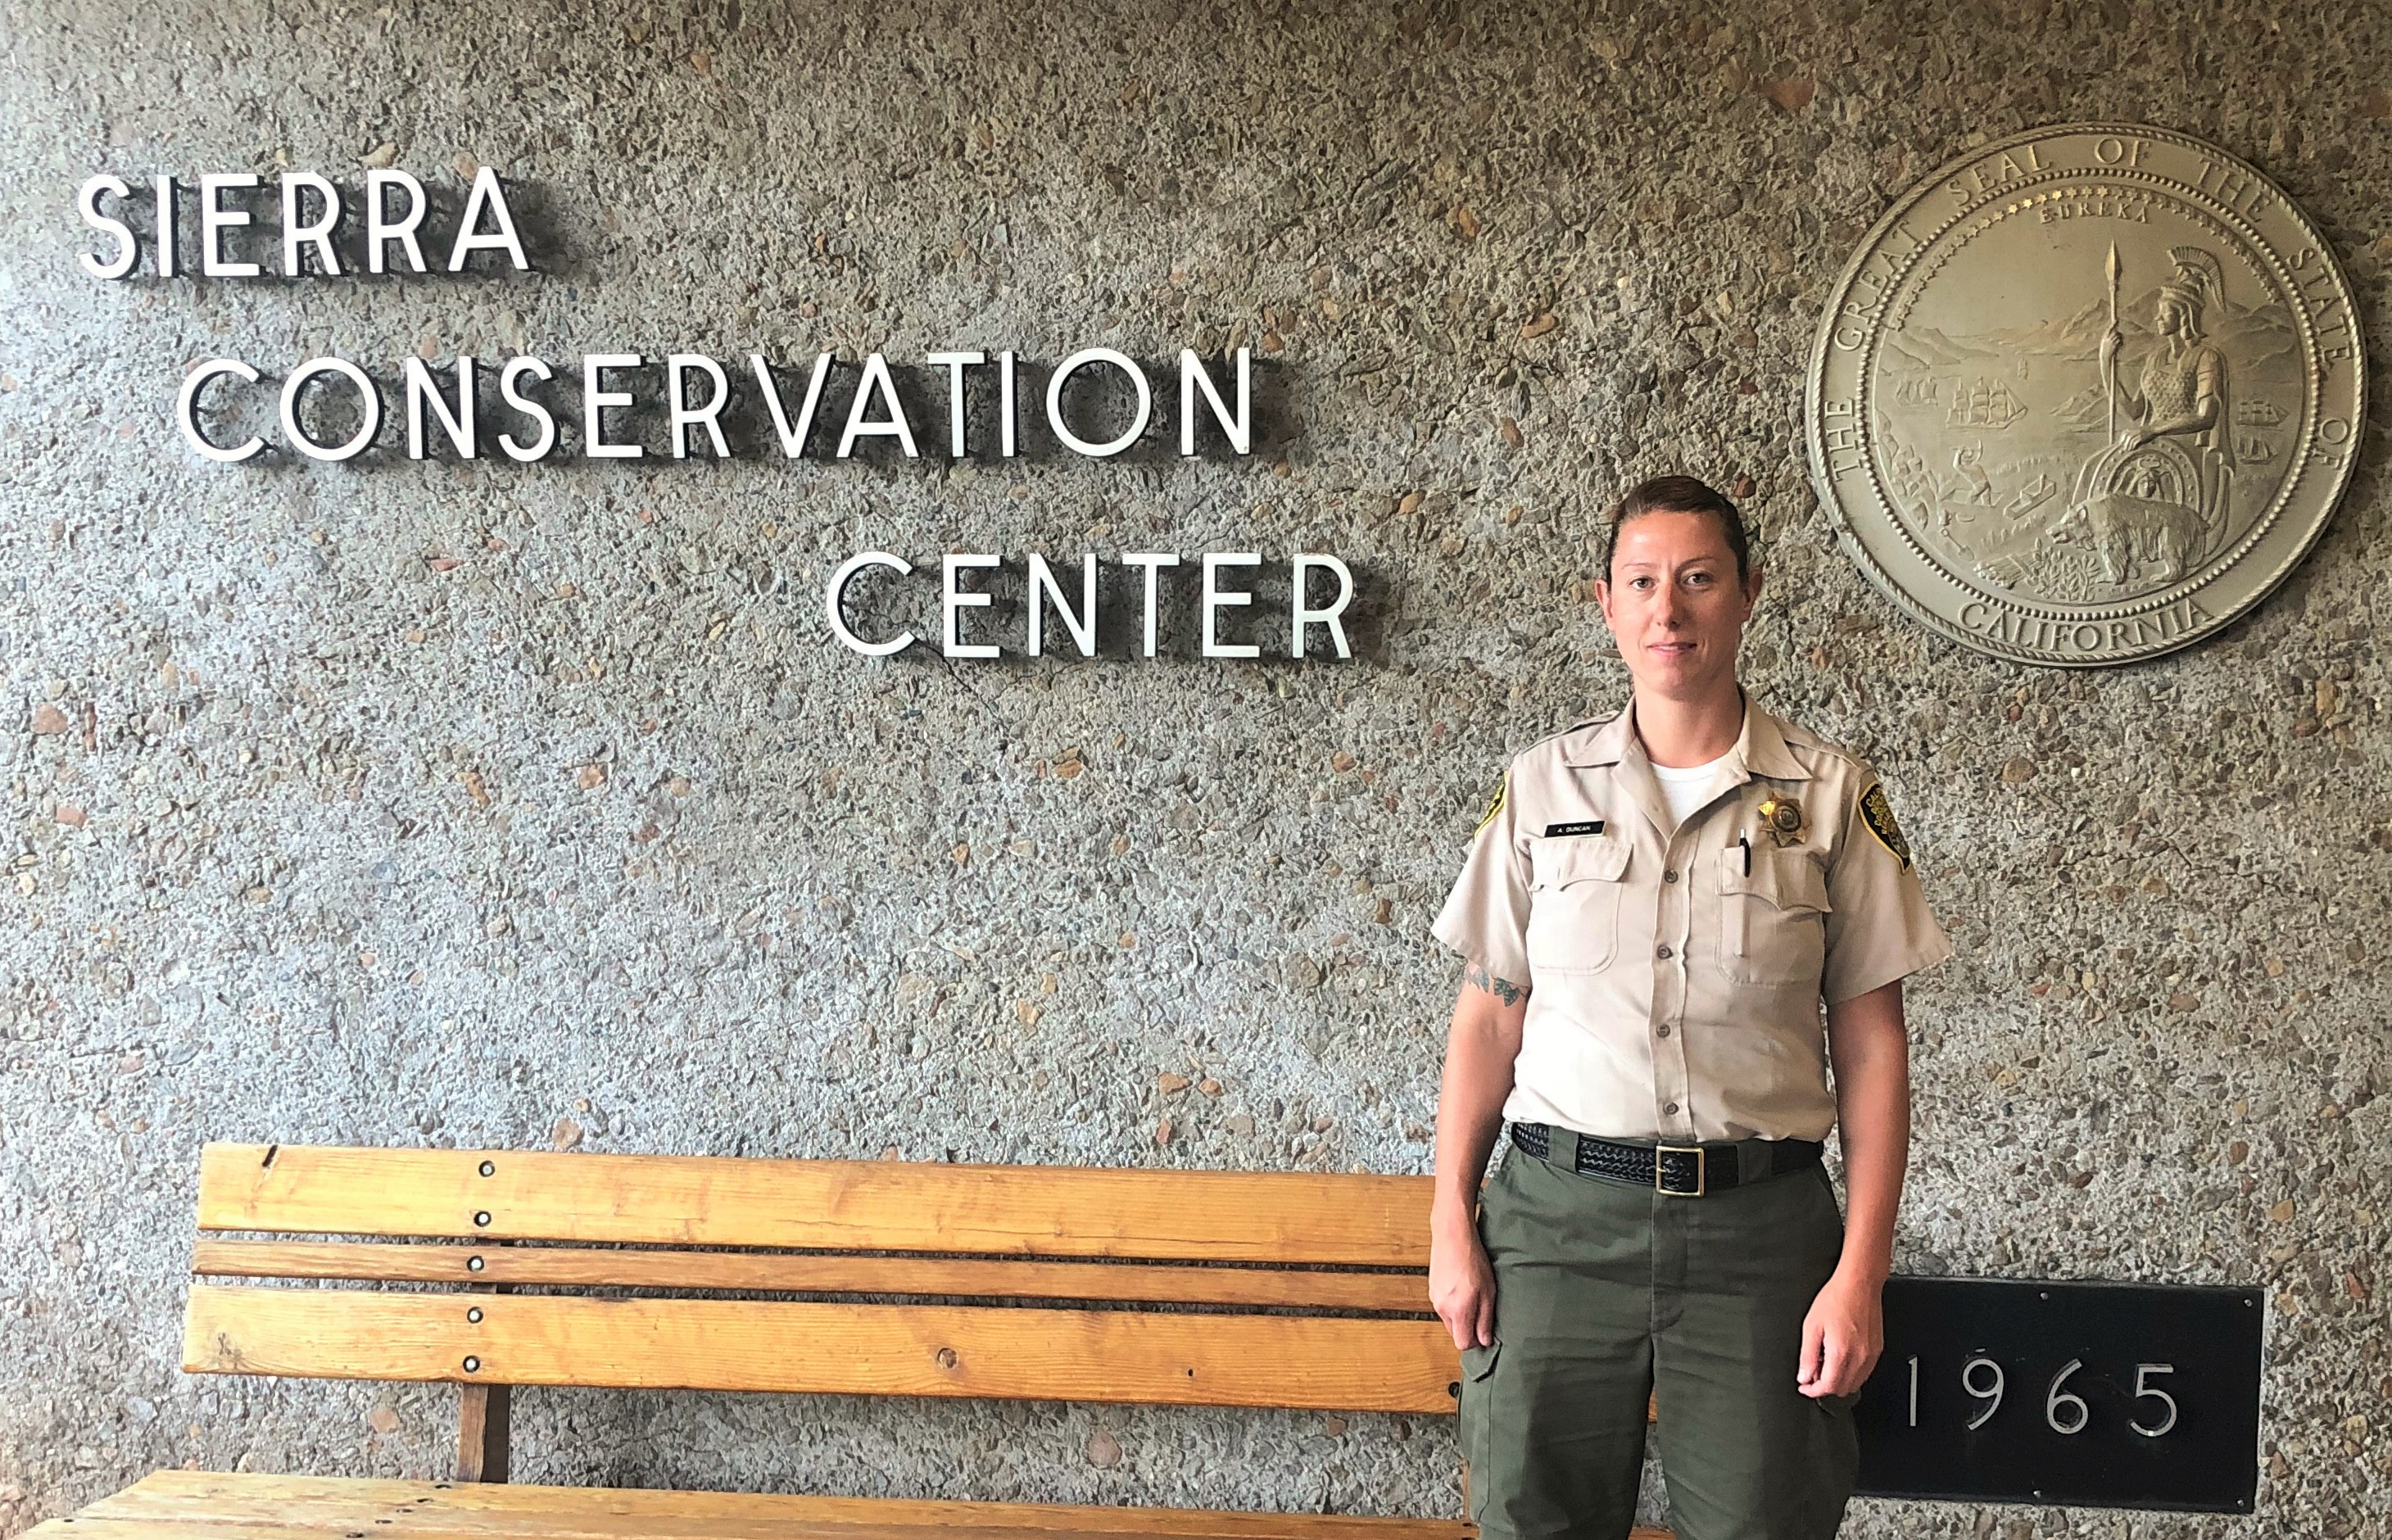 Woman in correctional officer uniform stands in front Sierra Conservation Center sign.